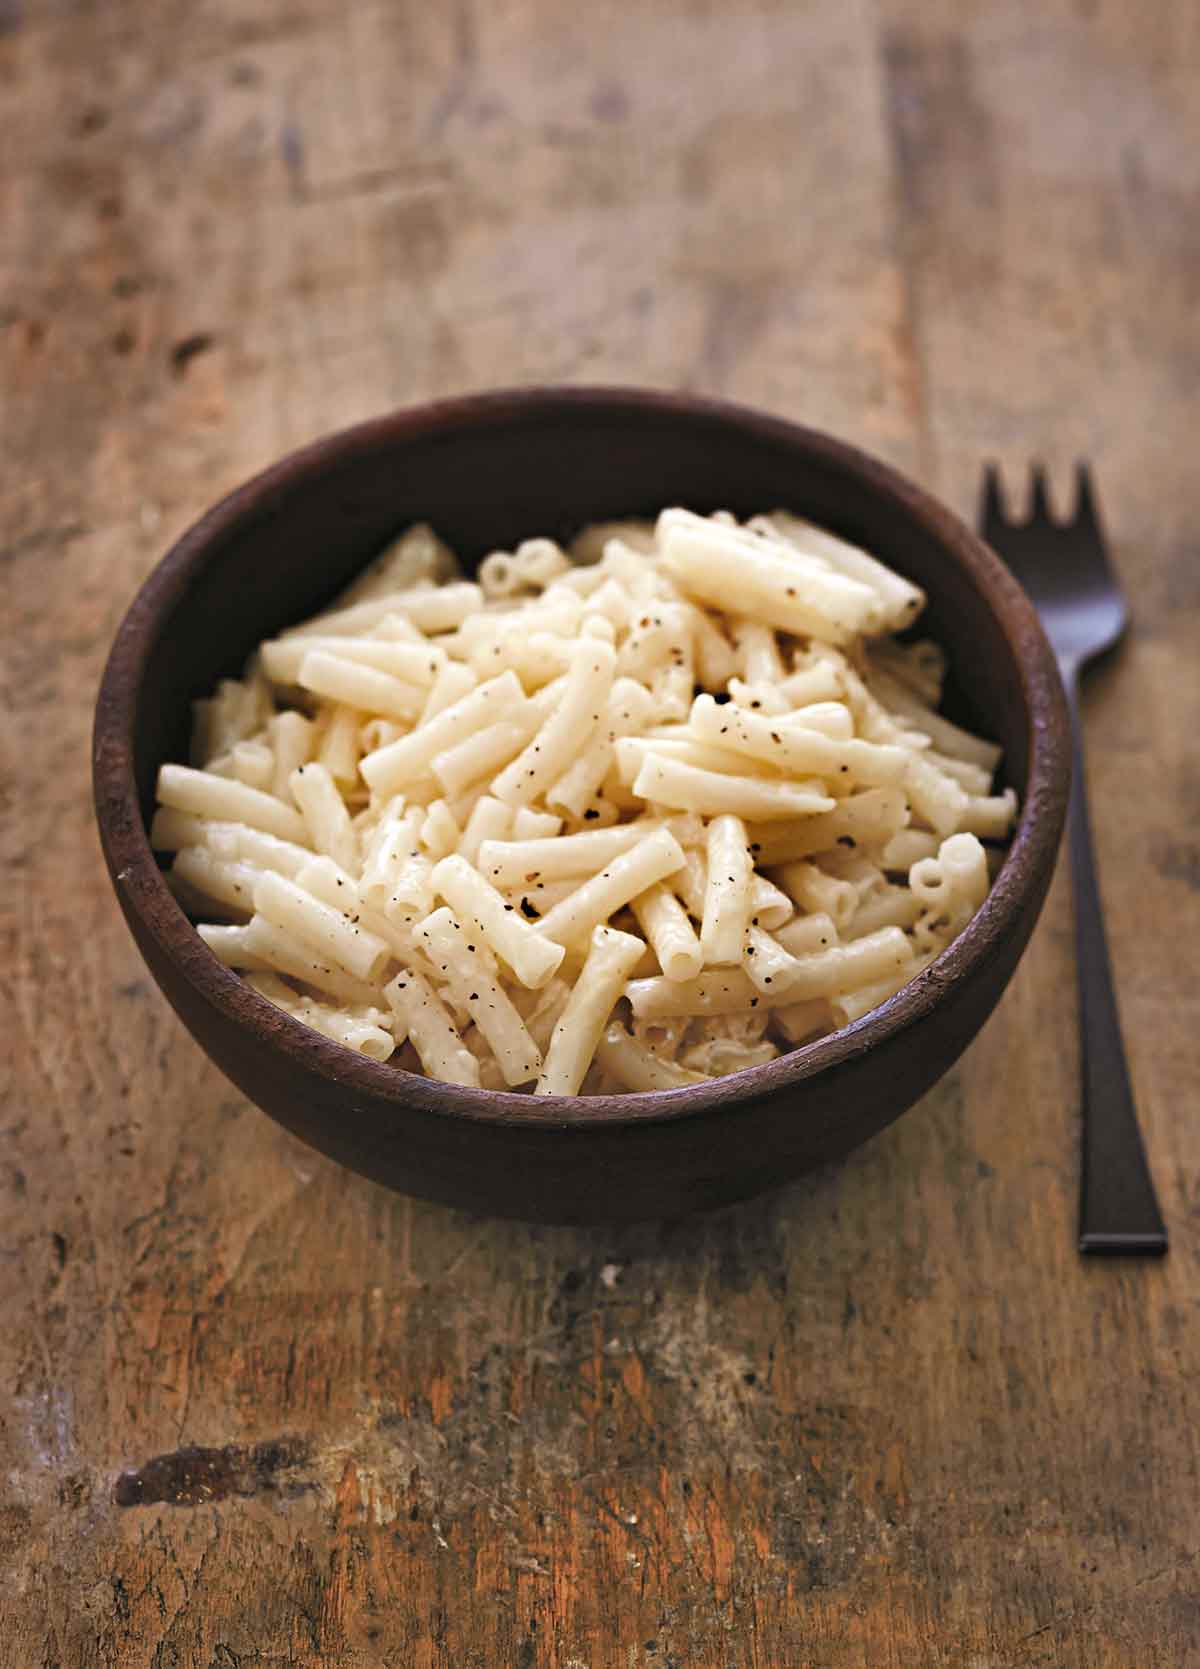 A brown bowl filled with gluten-free macaroni and cheese sprinkled with pepper on a wooden table with a fork resting beside the bowl.